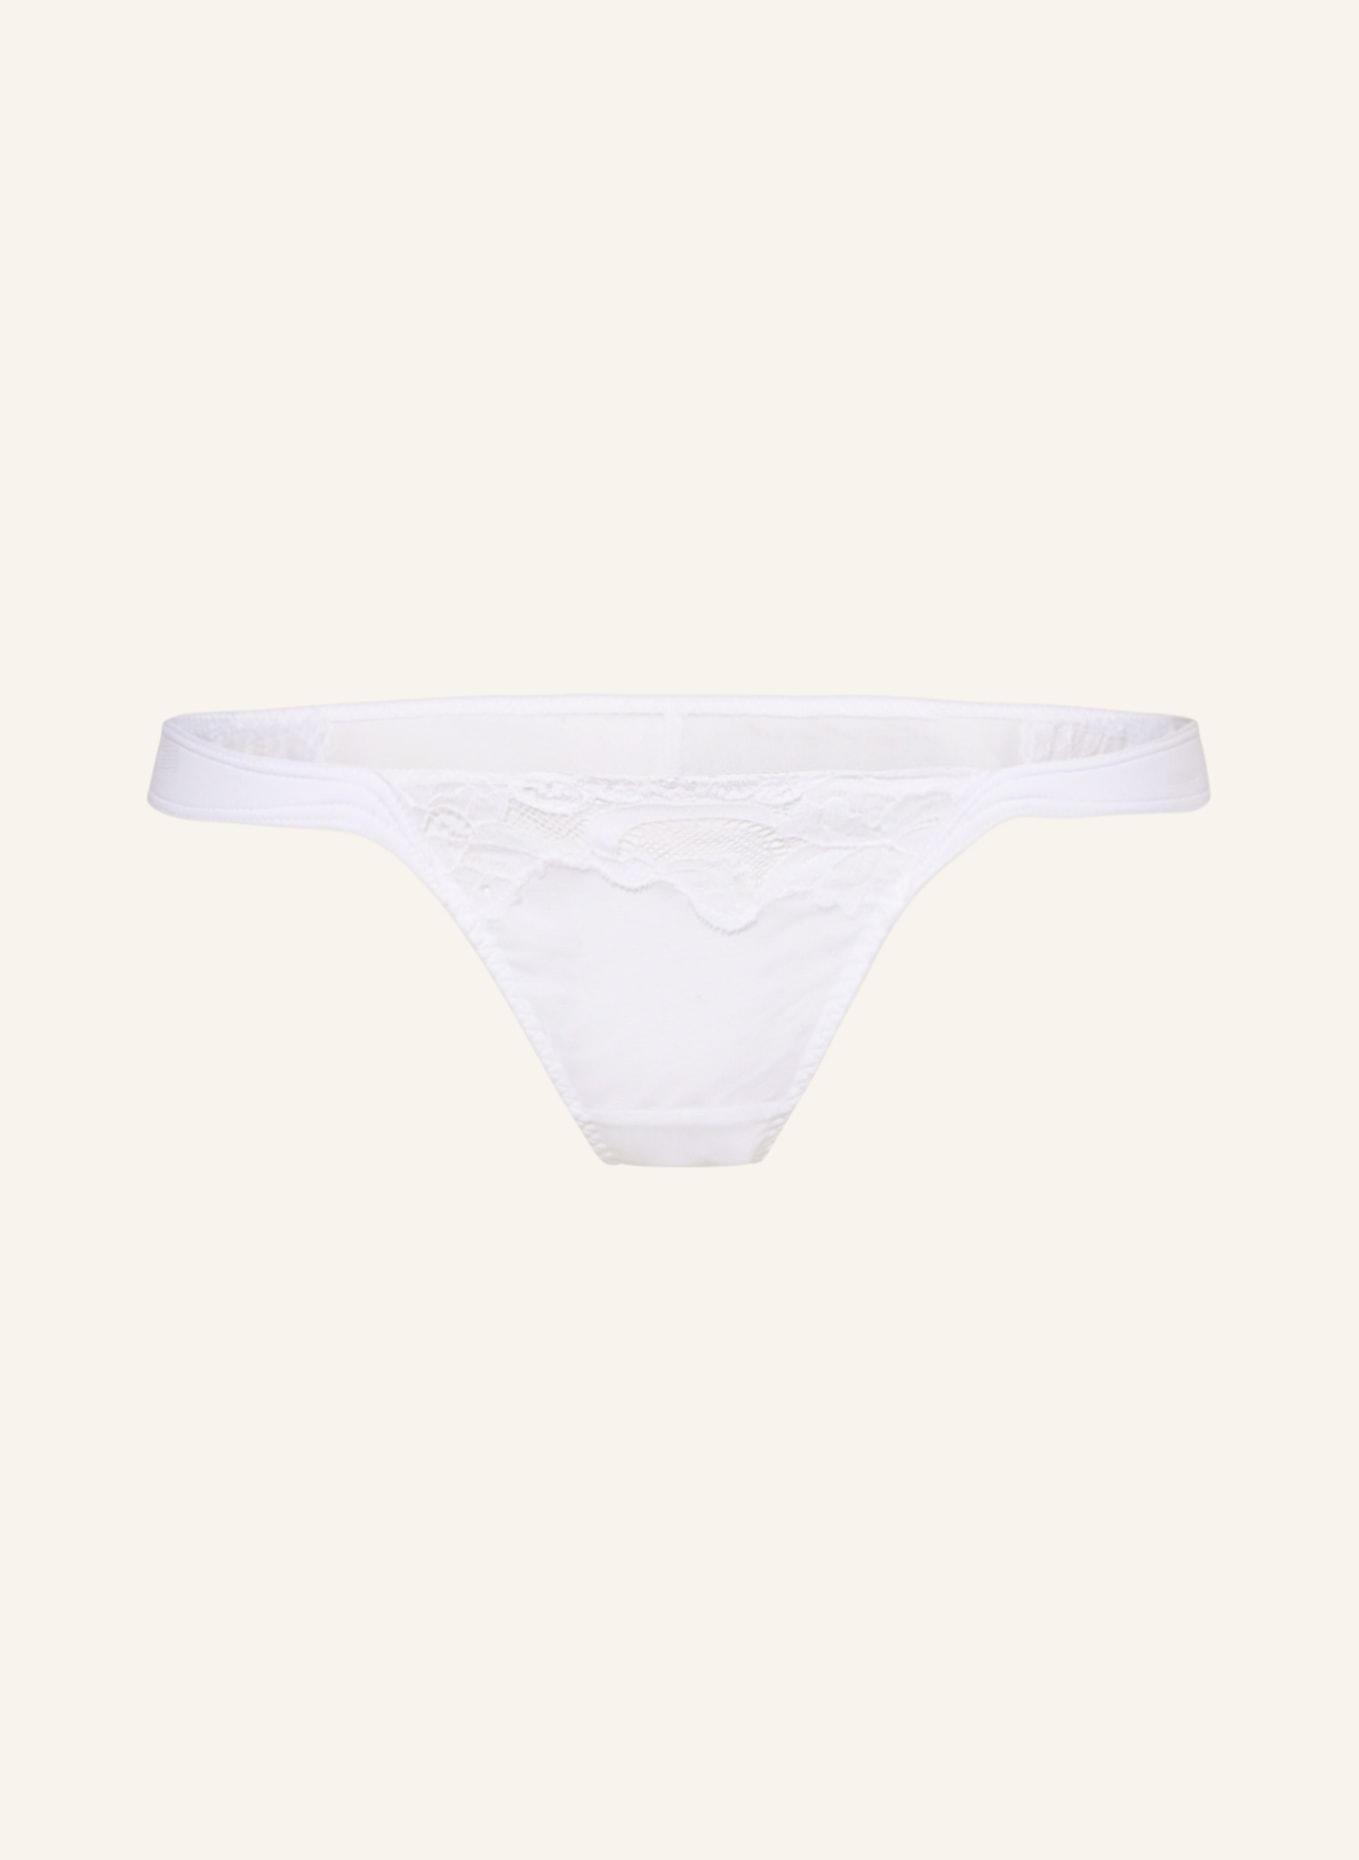 ANDRES SARDA Briefs DION, Color: WHITE (Image 1)